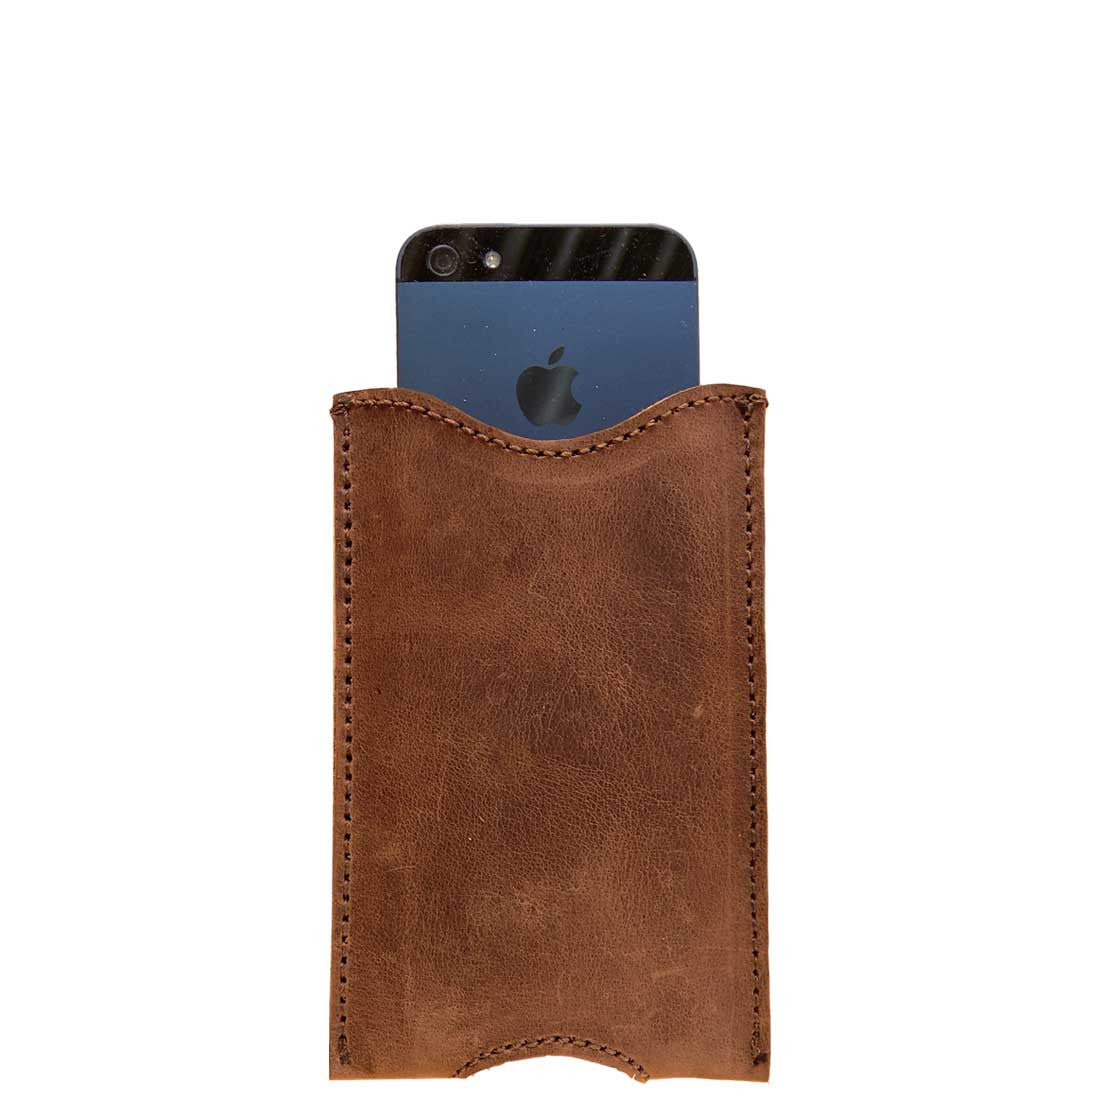 Durable iPhone Sleeve by Hide & Drink - 100% Handmade Leather